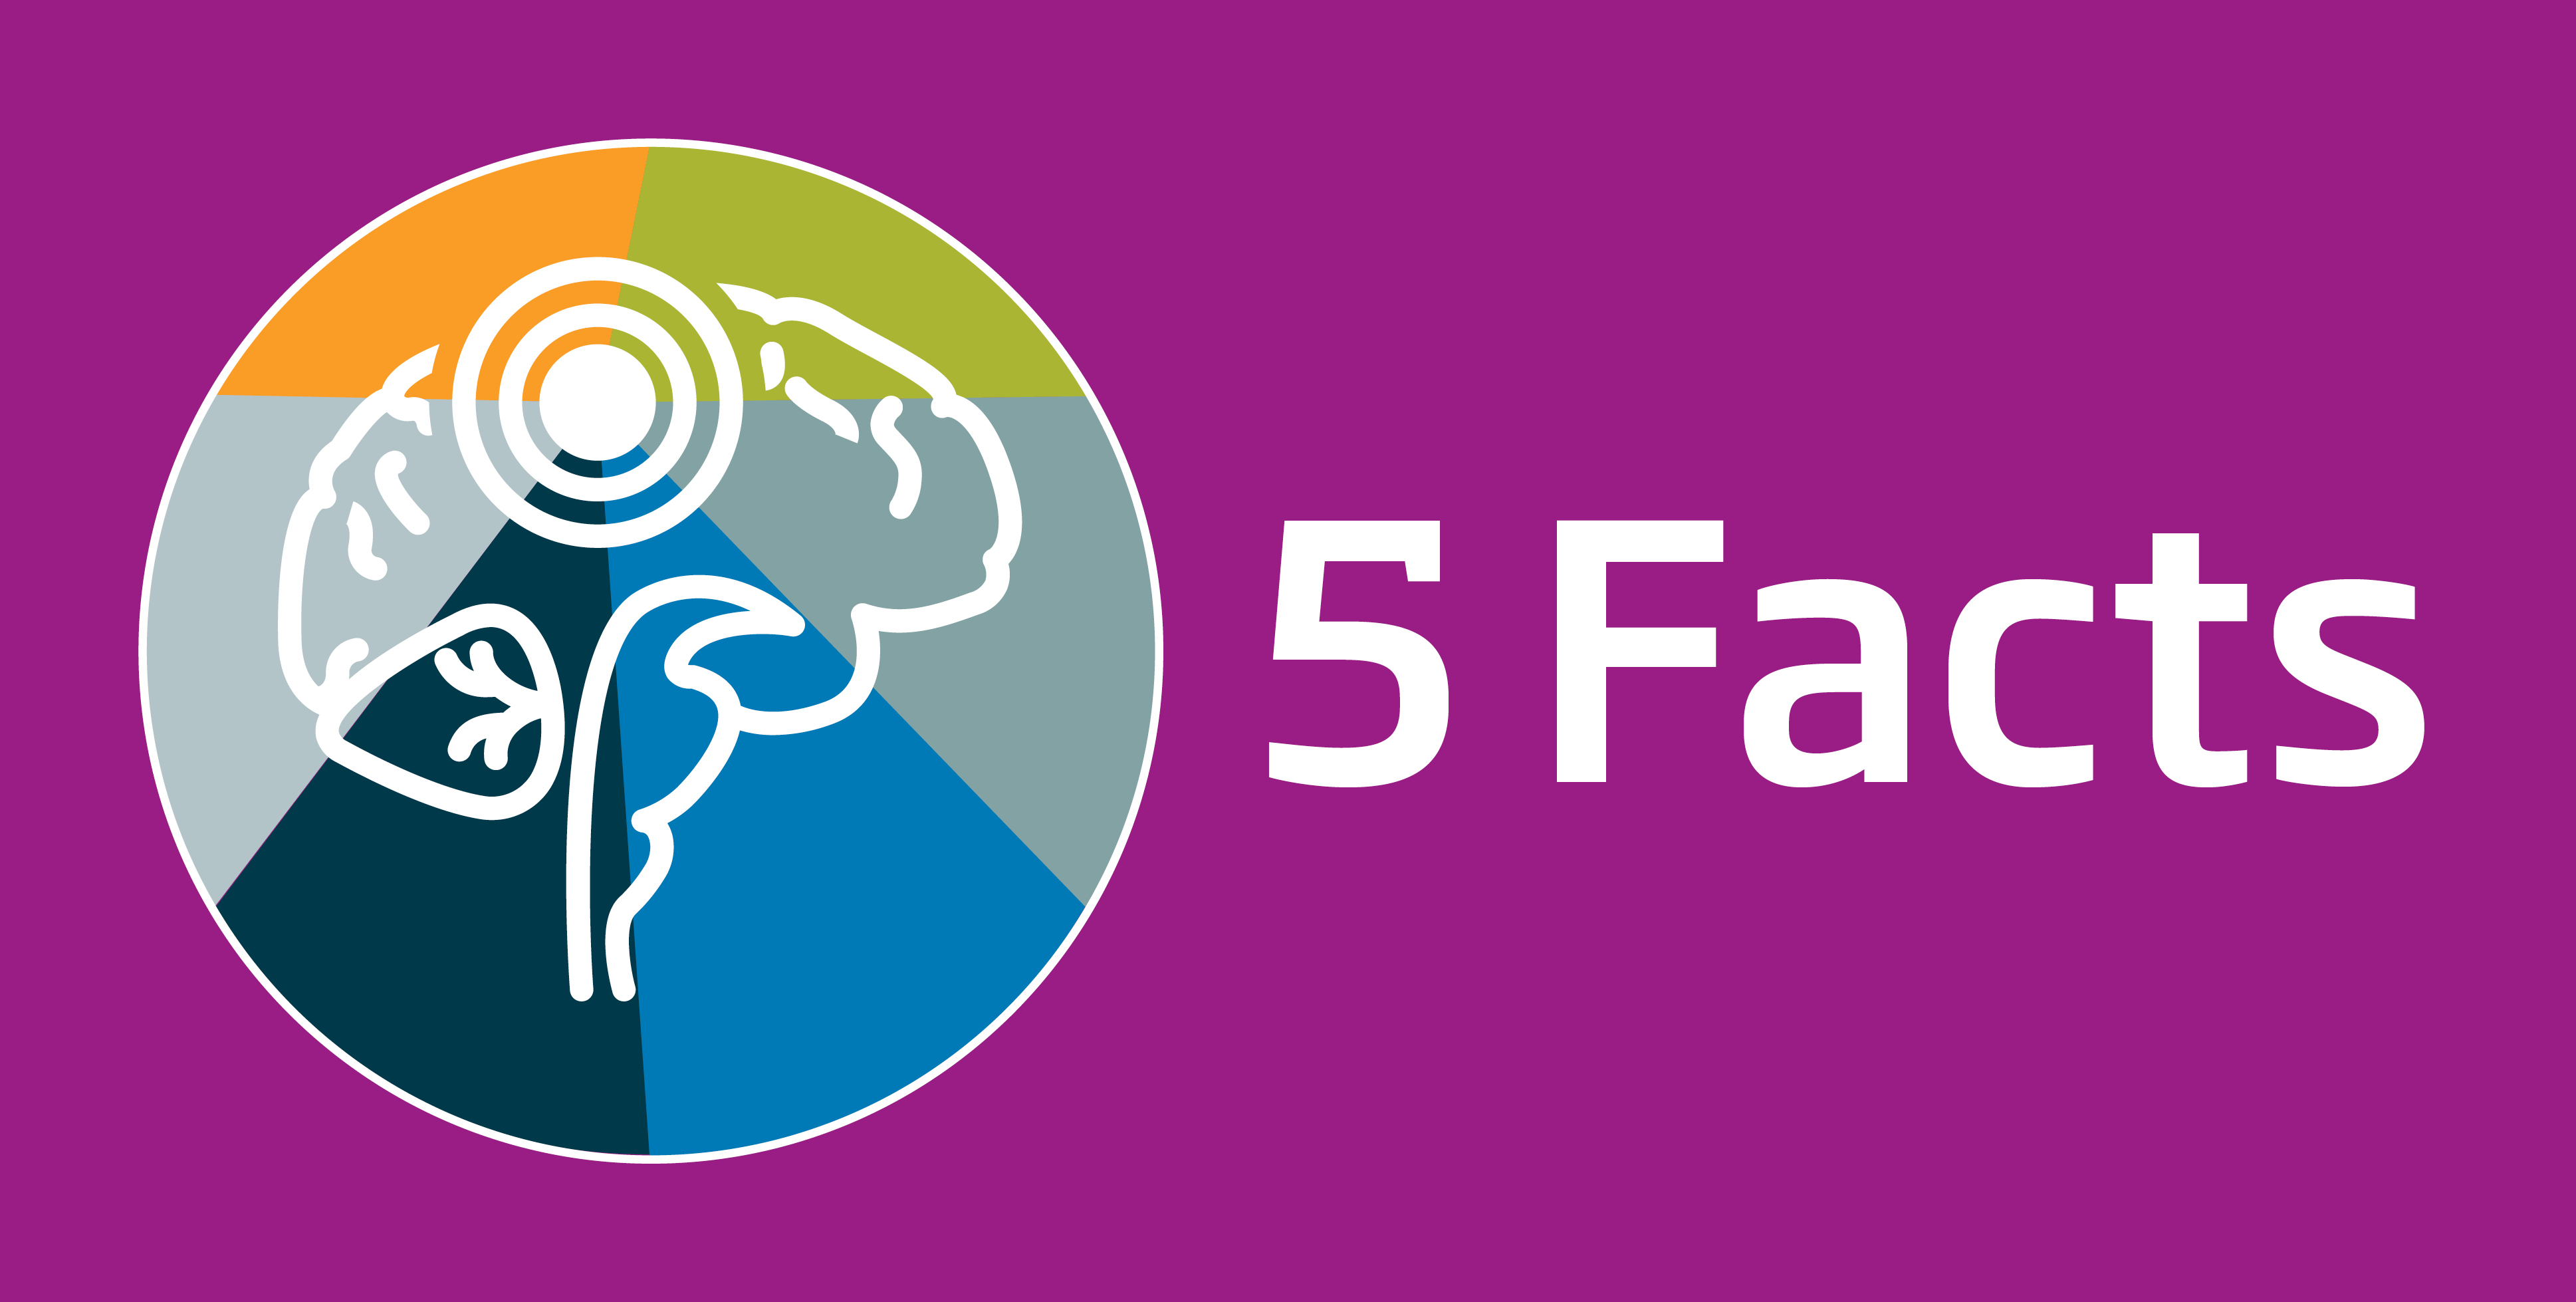 5 facts infographic logo